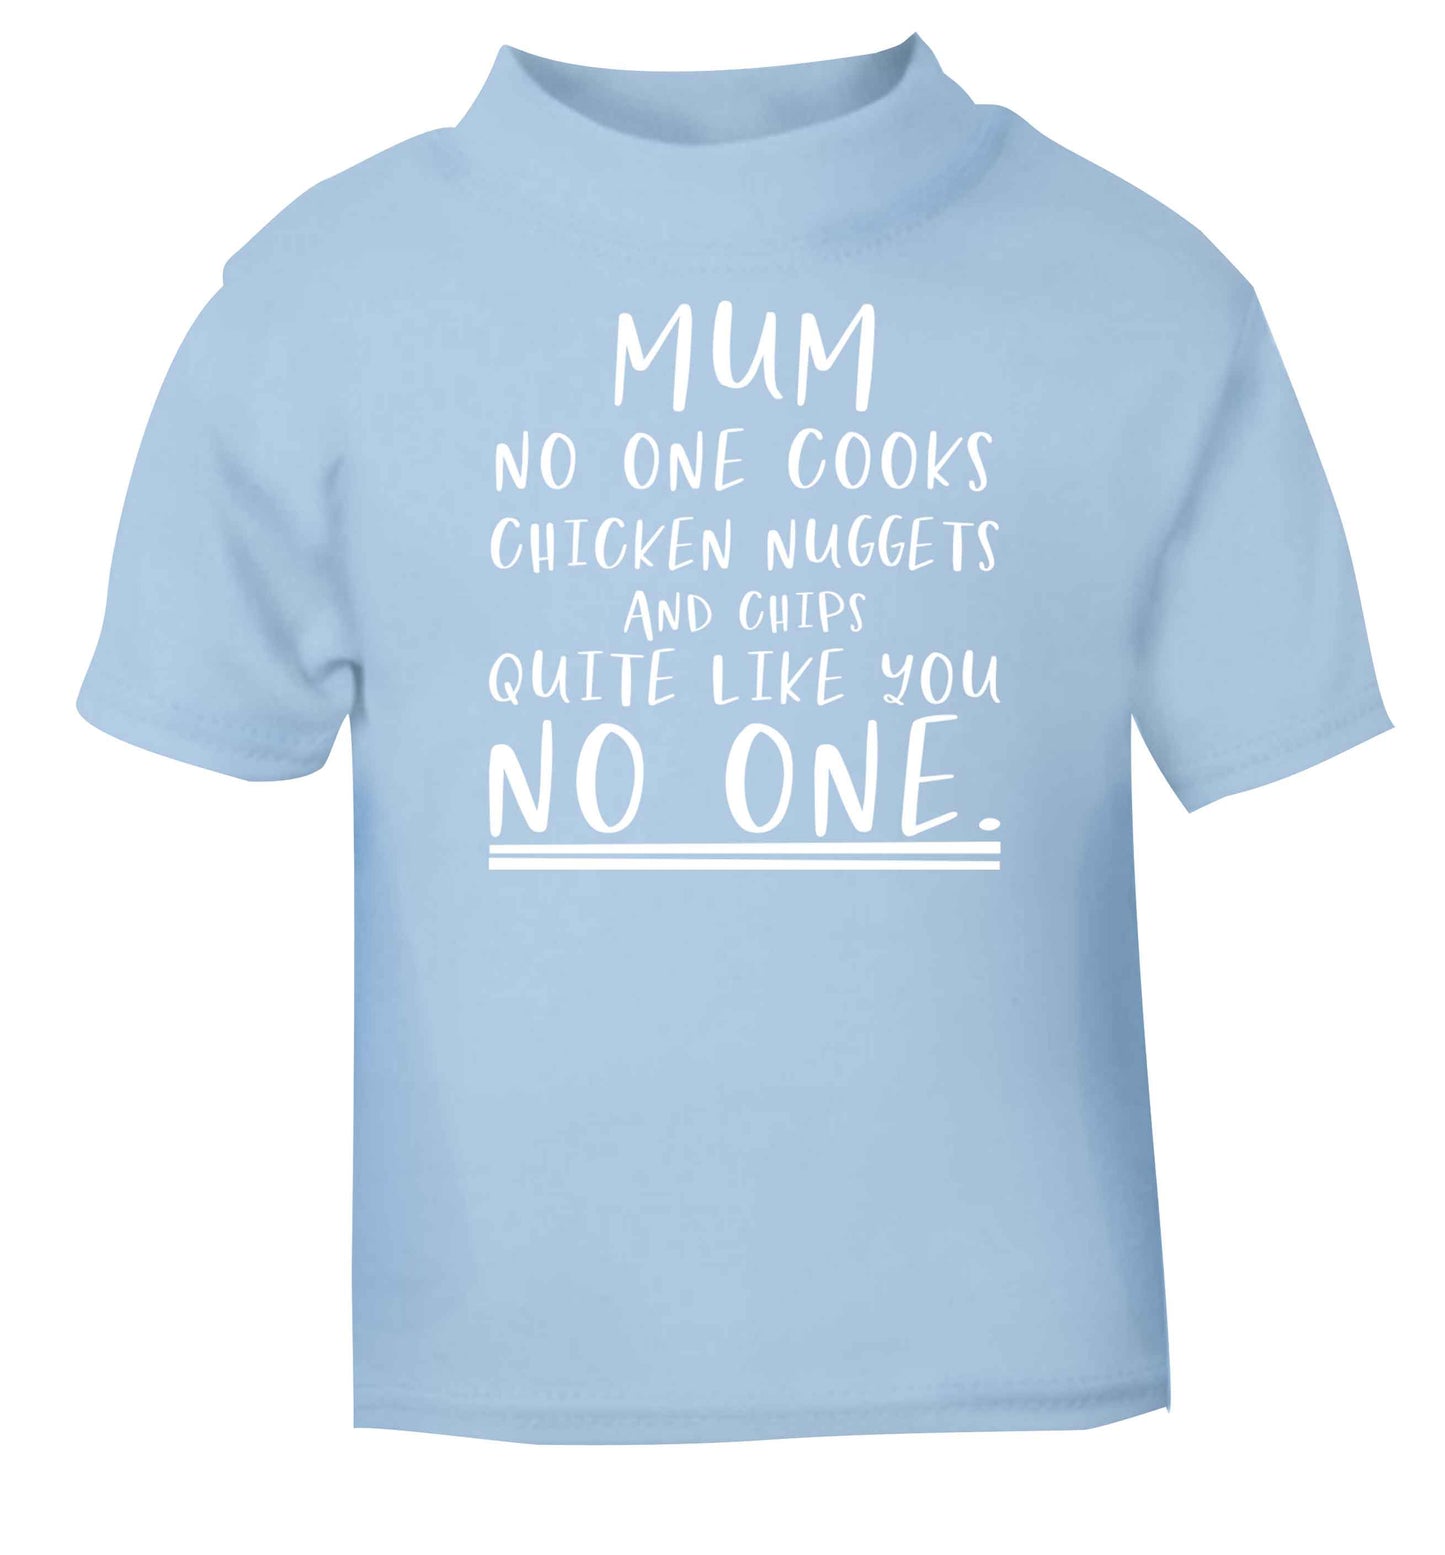 Super funny sassy gift for mother's day or birthday!  Mum no one cooks chicken nuggets and chips like you no one light blue baby toddler Tshirt 2 Years